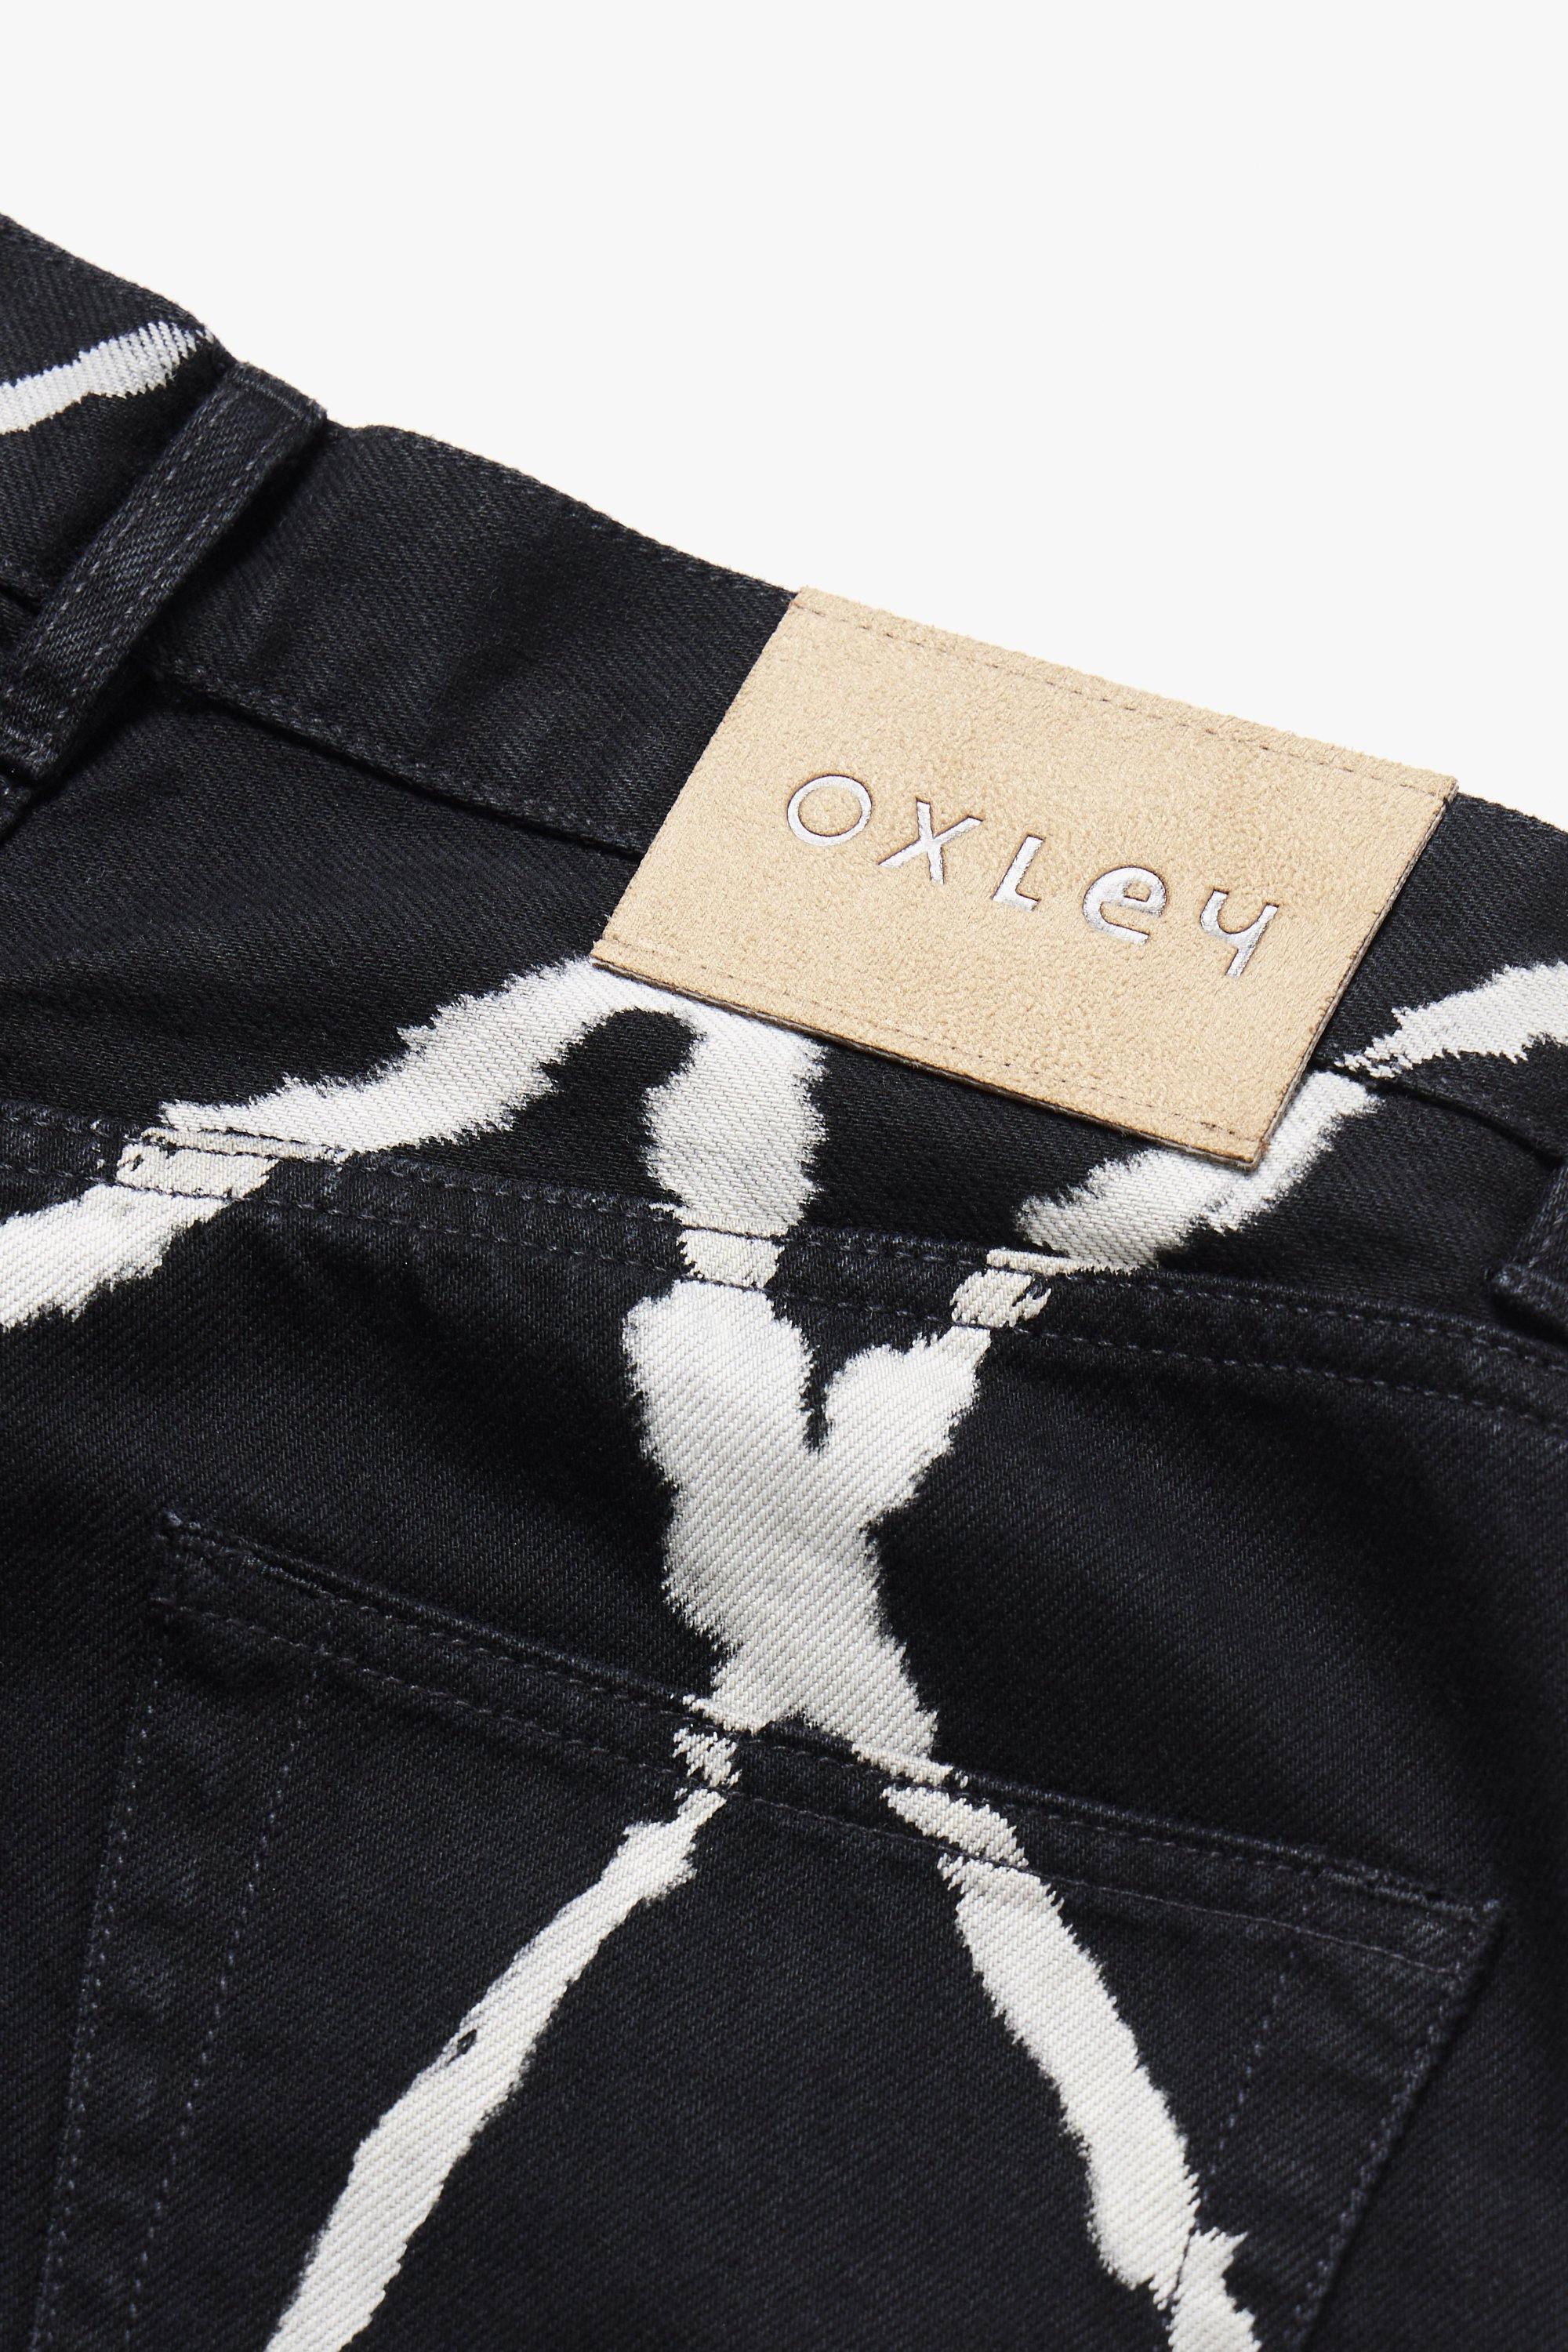 Oxley Hand Printed Organic Cotton Denim Jeans - Oxley Official